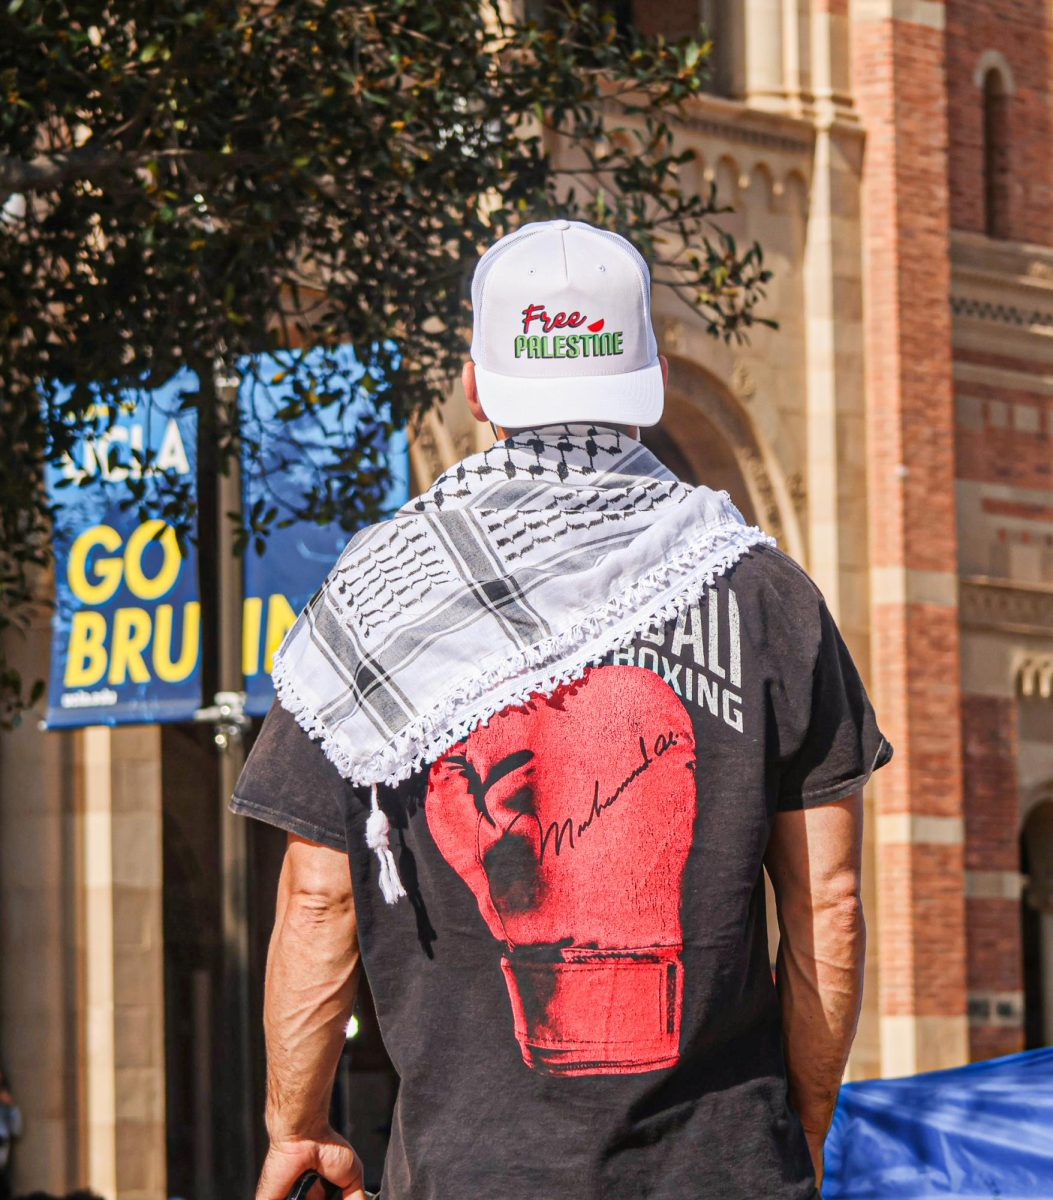 A protester stands near Dickson Plaza at the University of California, Los Angeles (UCLA), where students and external supporters set up a pro-Palestinian encampment. The University of California Police Department and the Los Angeles Police Department forcibly disbanded the encampment after there was a violent confrontation.